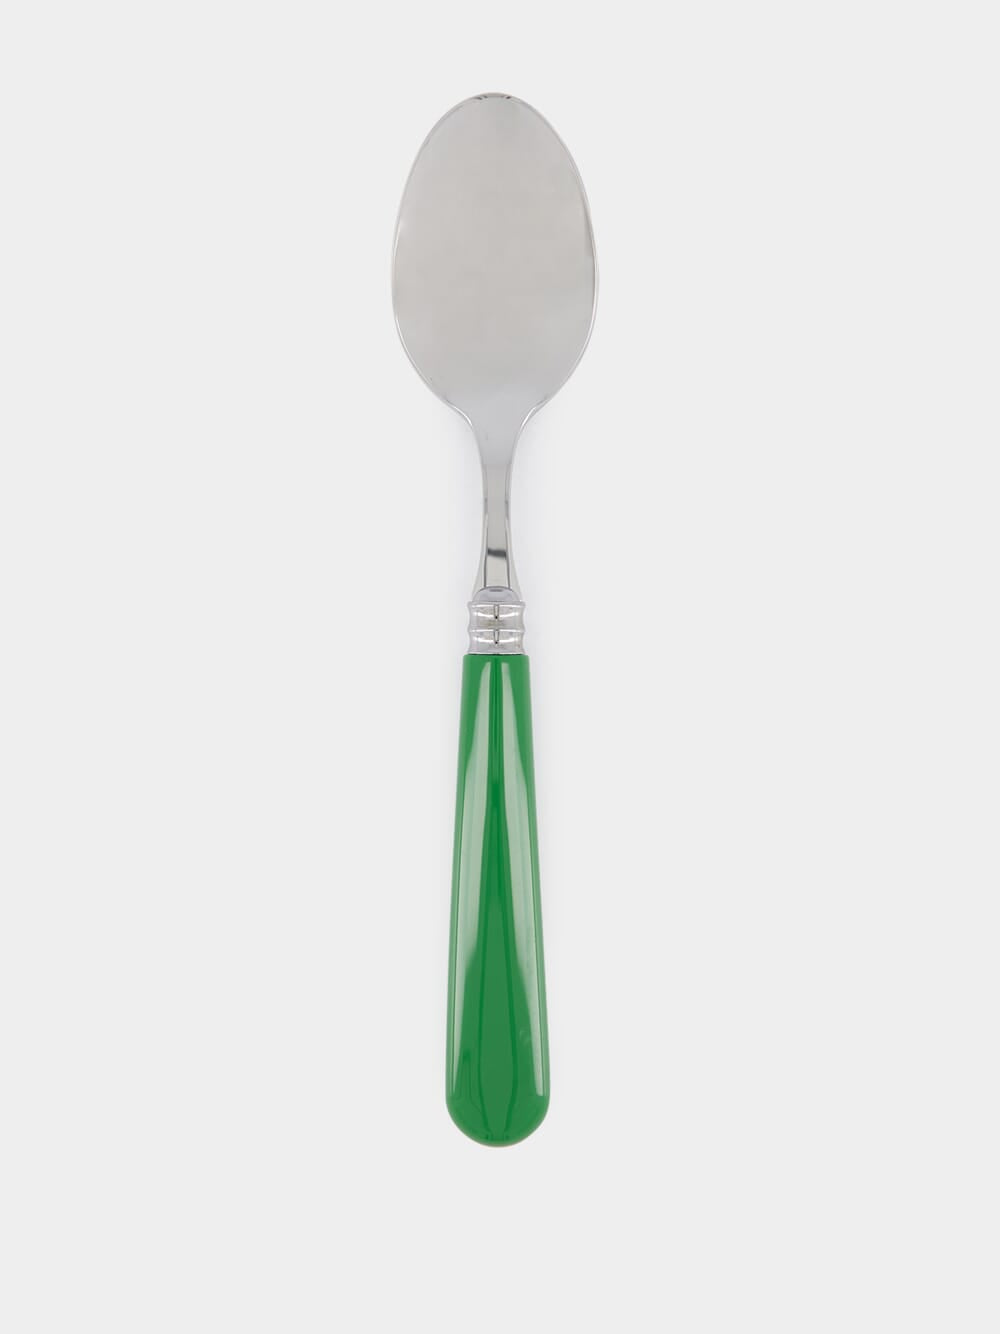 Helios Green Cutlery Set of 24 (french blade)